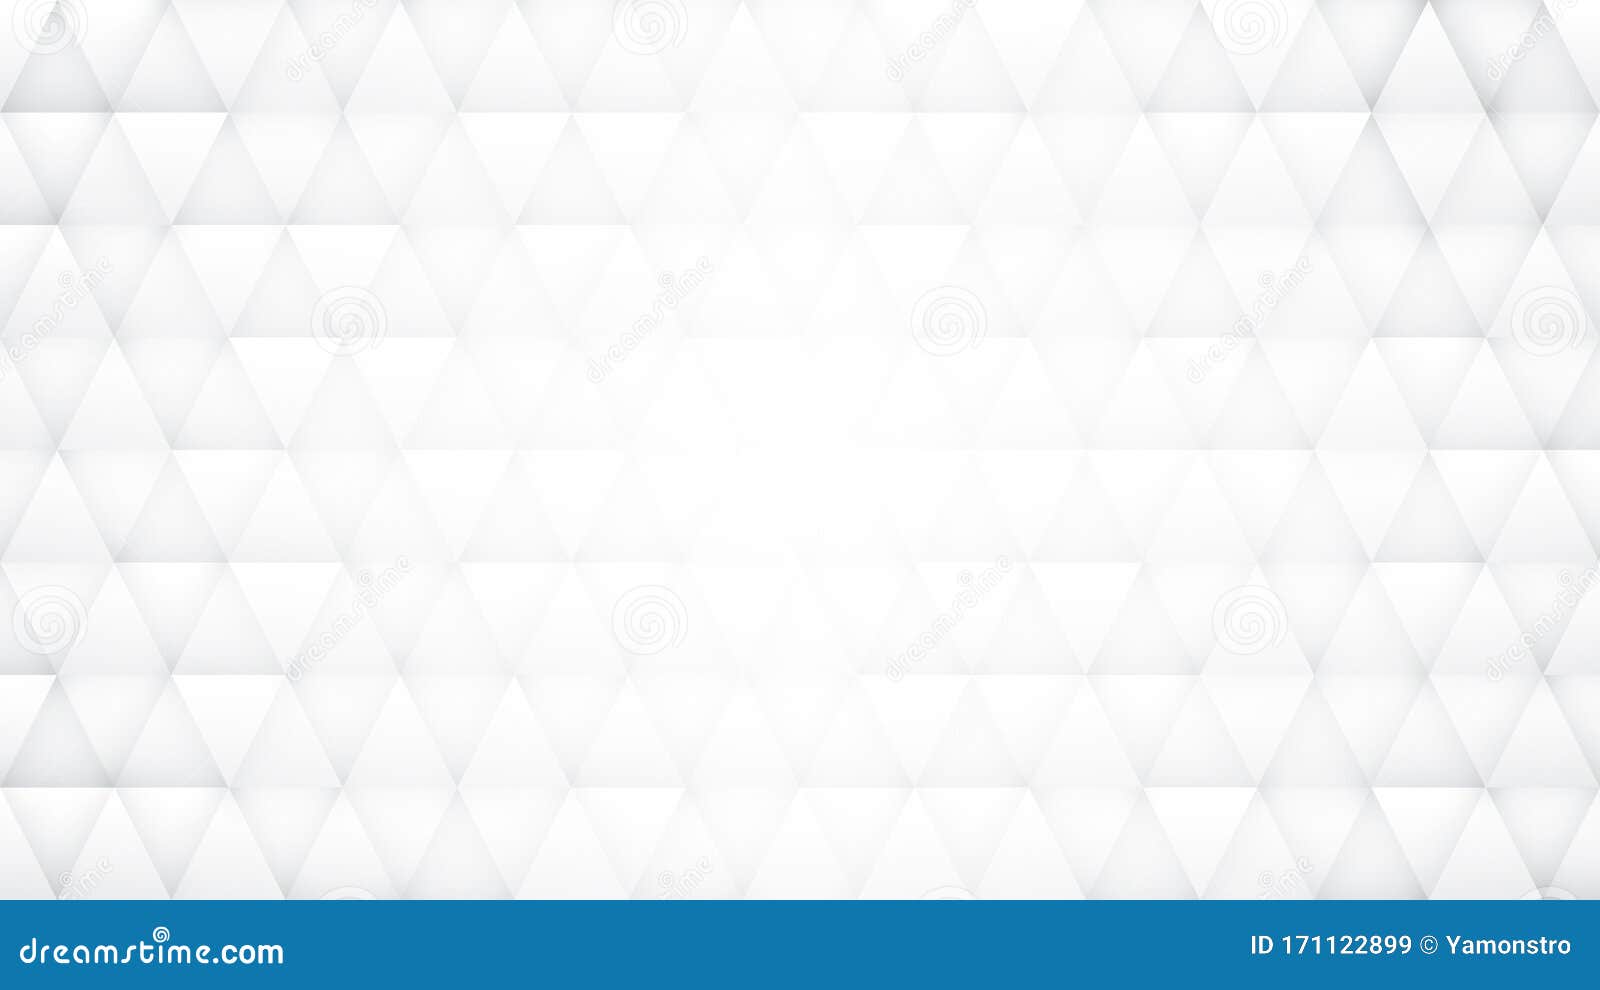 Conceptual 3D Triangles Pattern Tech Minimalist White Abstract Background  Stock Illustration - Illustration of high, futuristic: 171122899